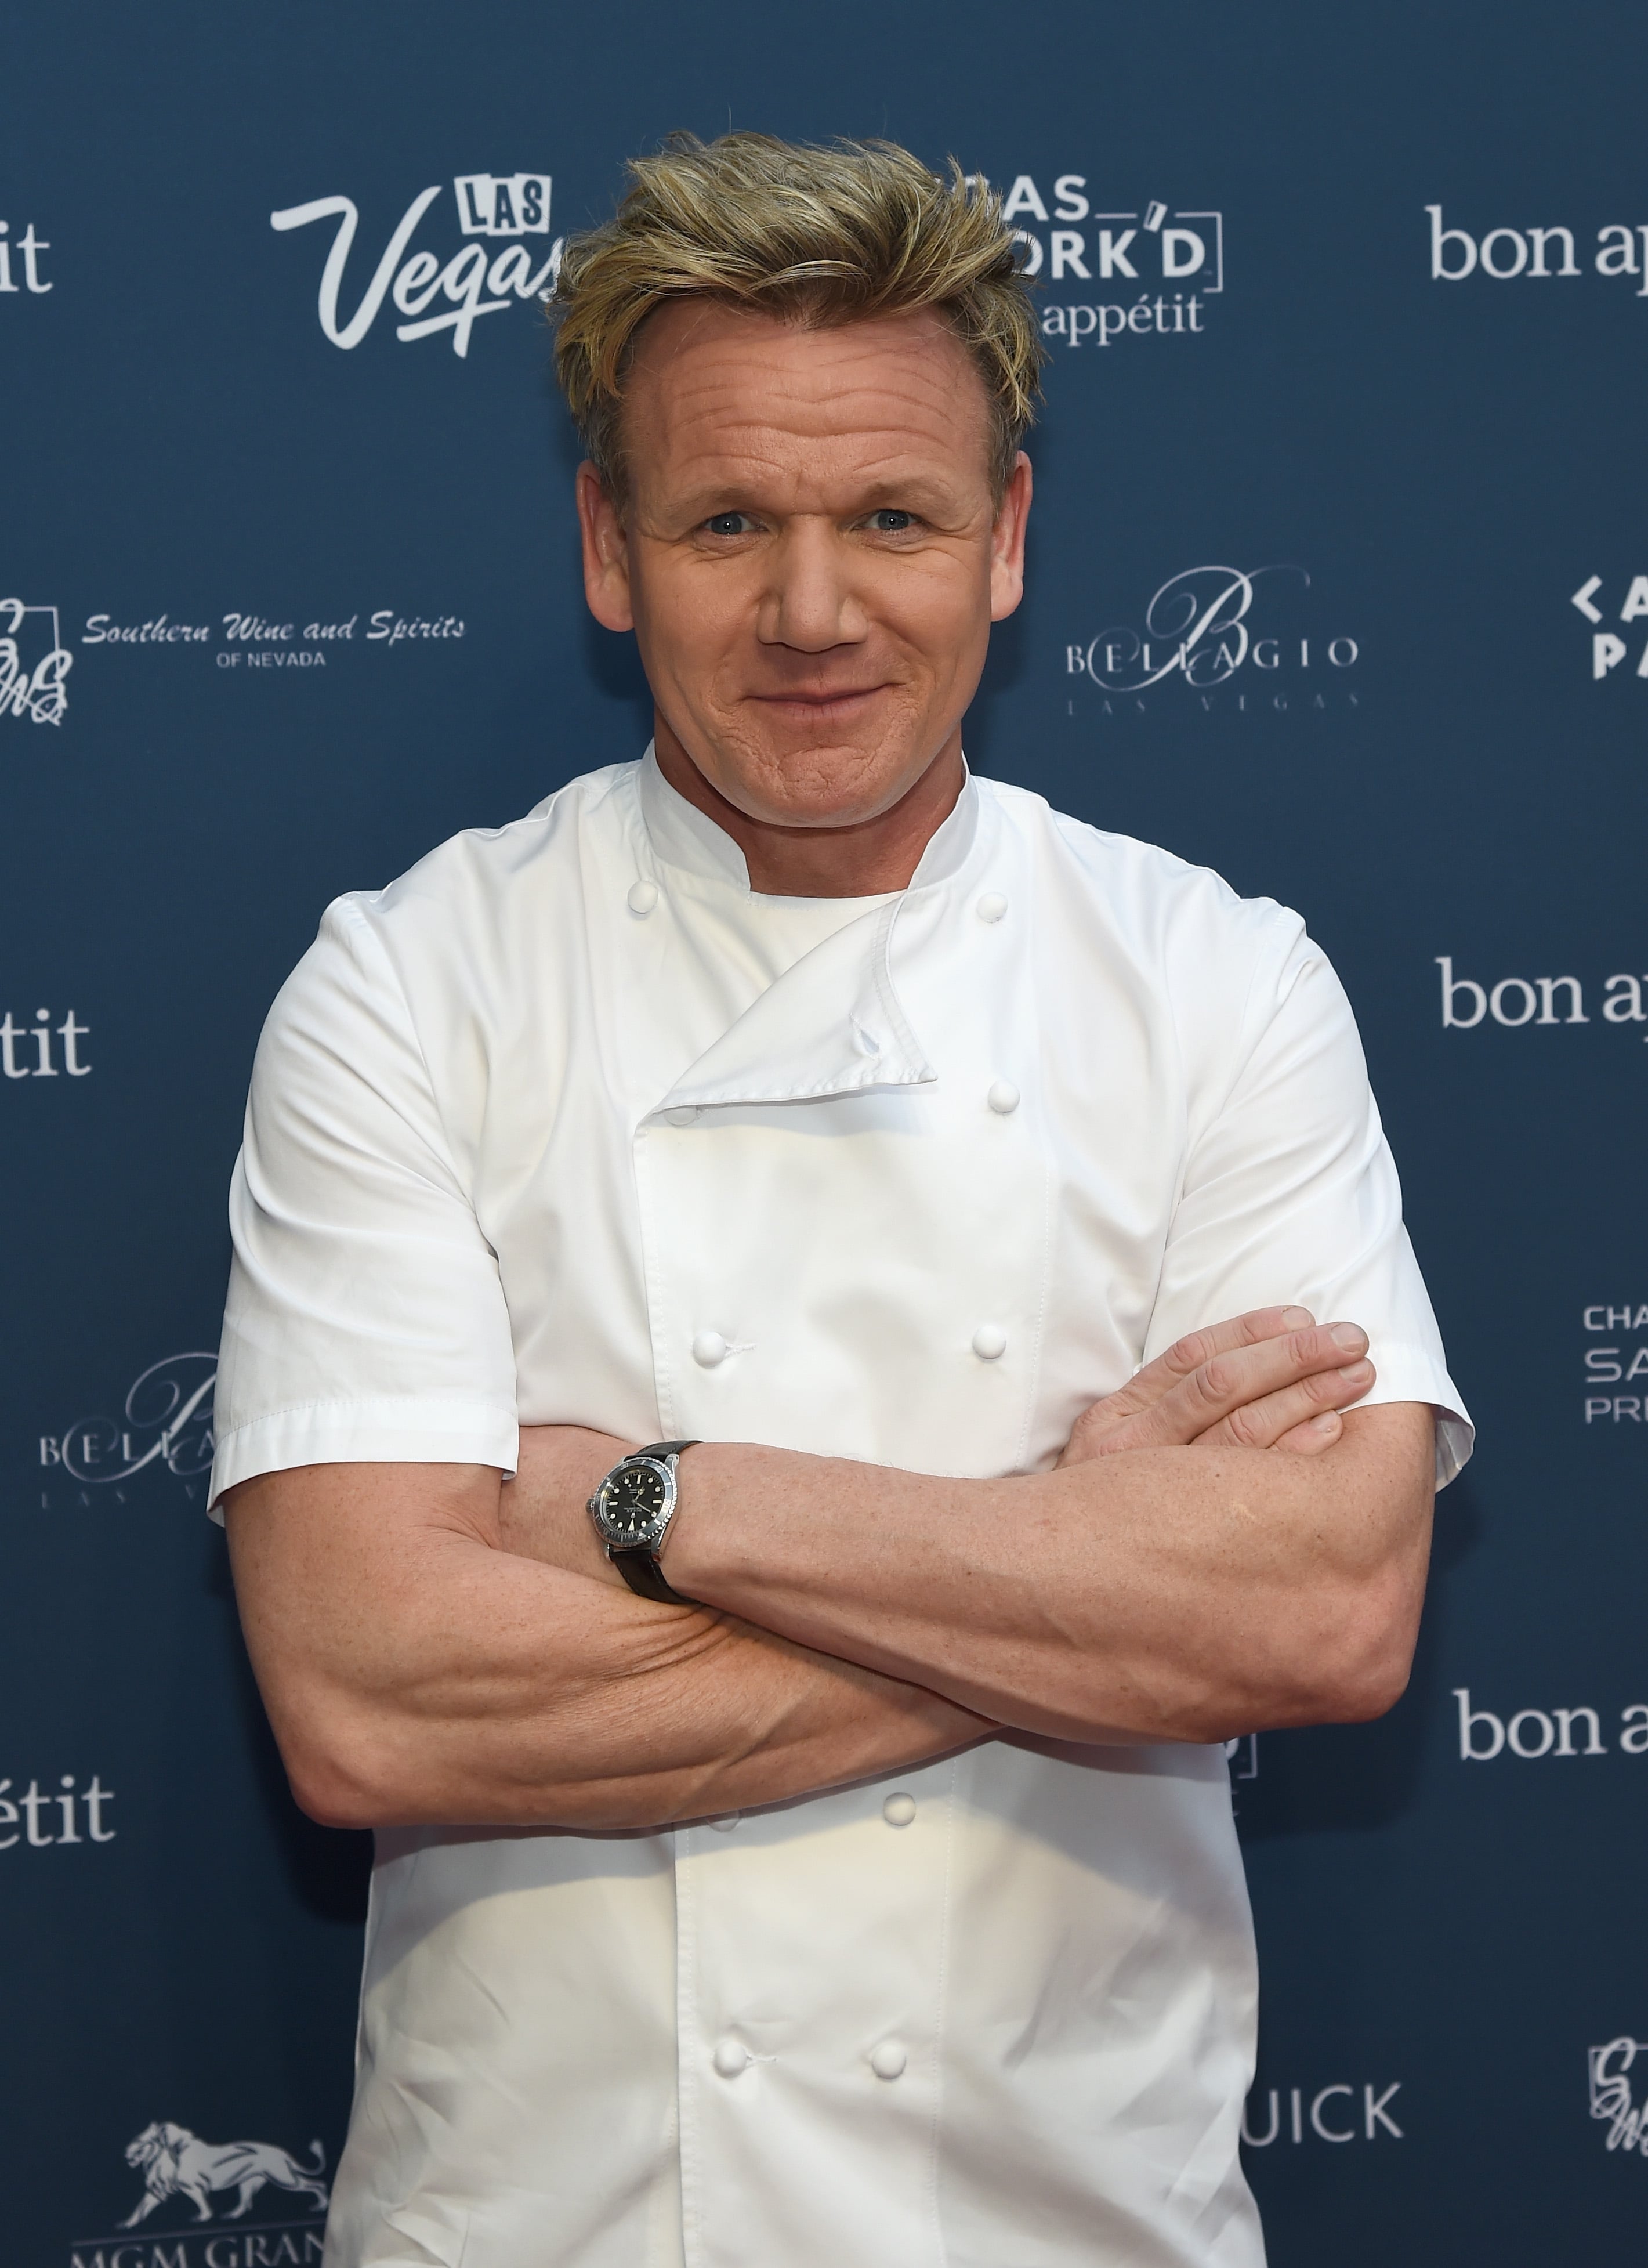 Gordon Ramsay named best chef in the world: These are the knives he is using